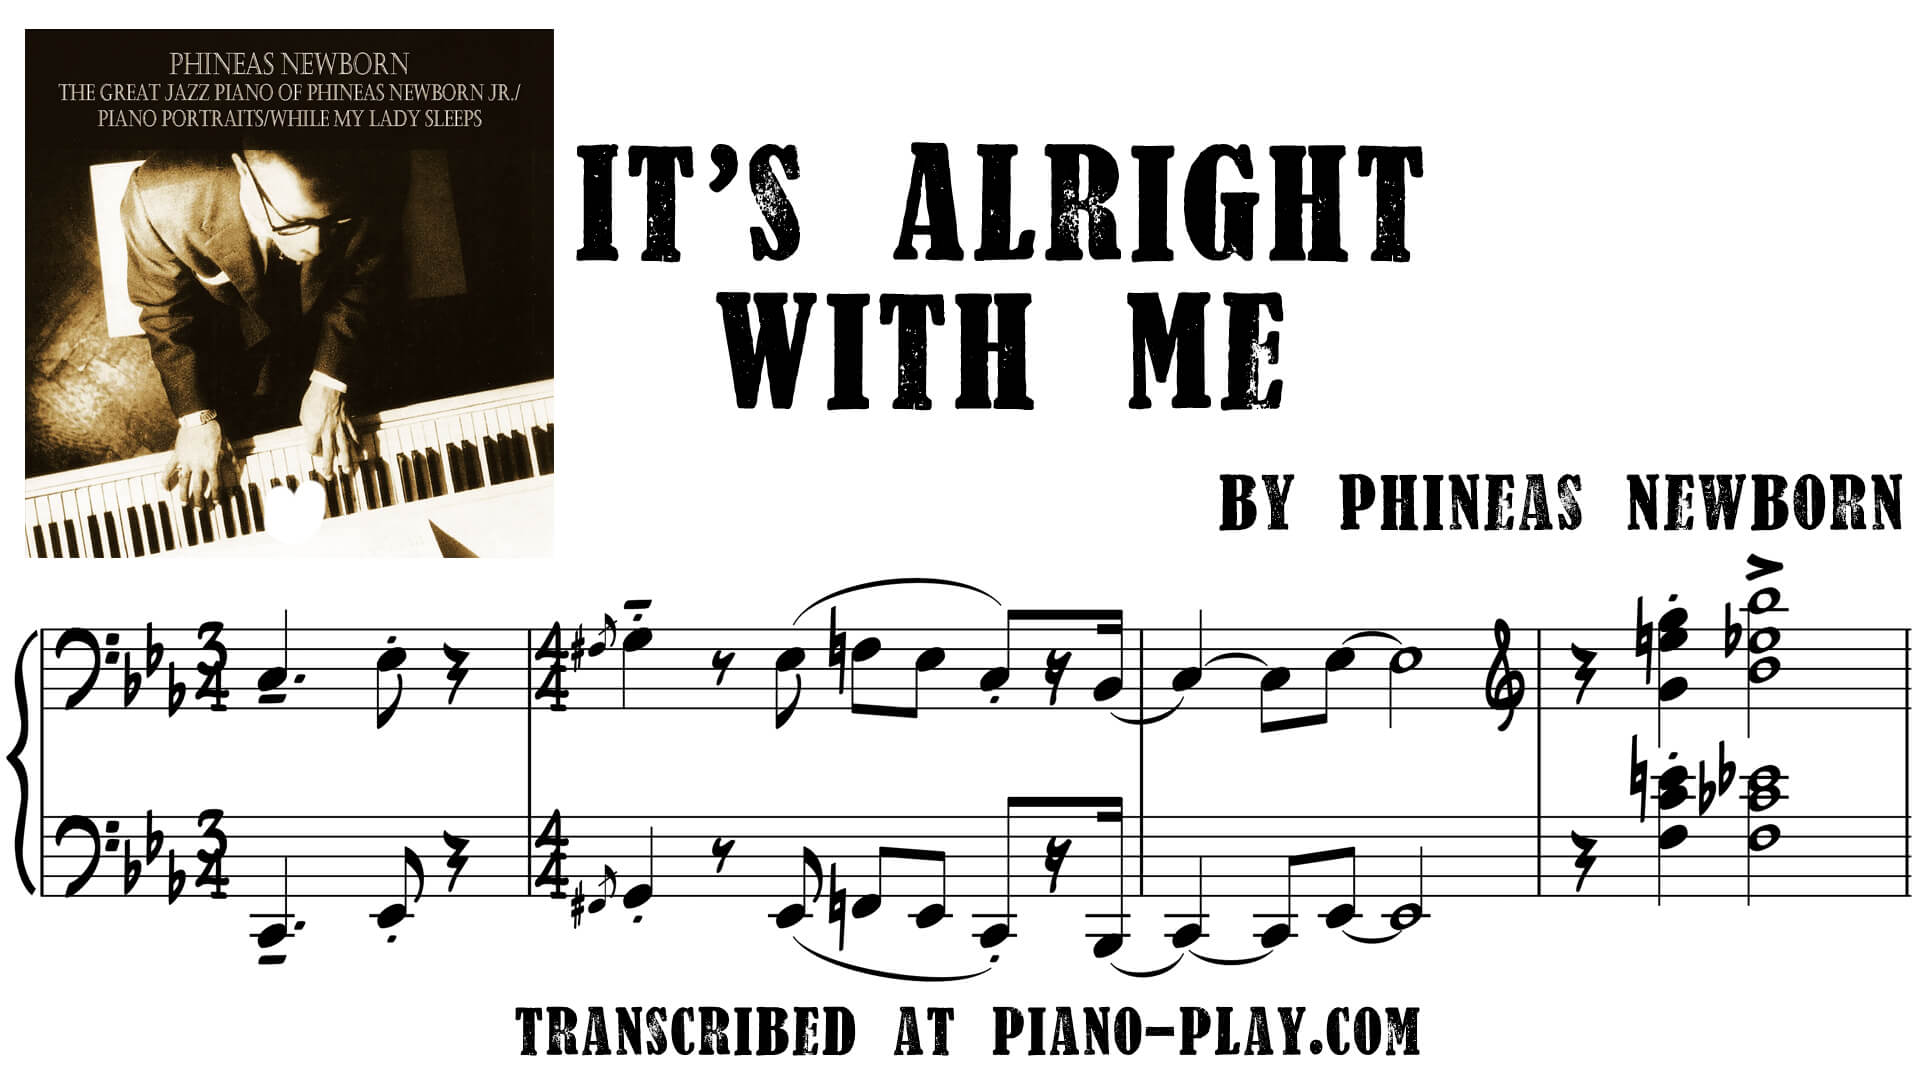 transcription Phineas Newborn It's Alright With Me